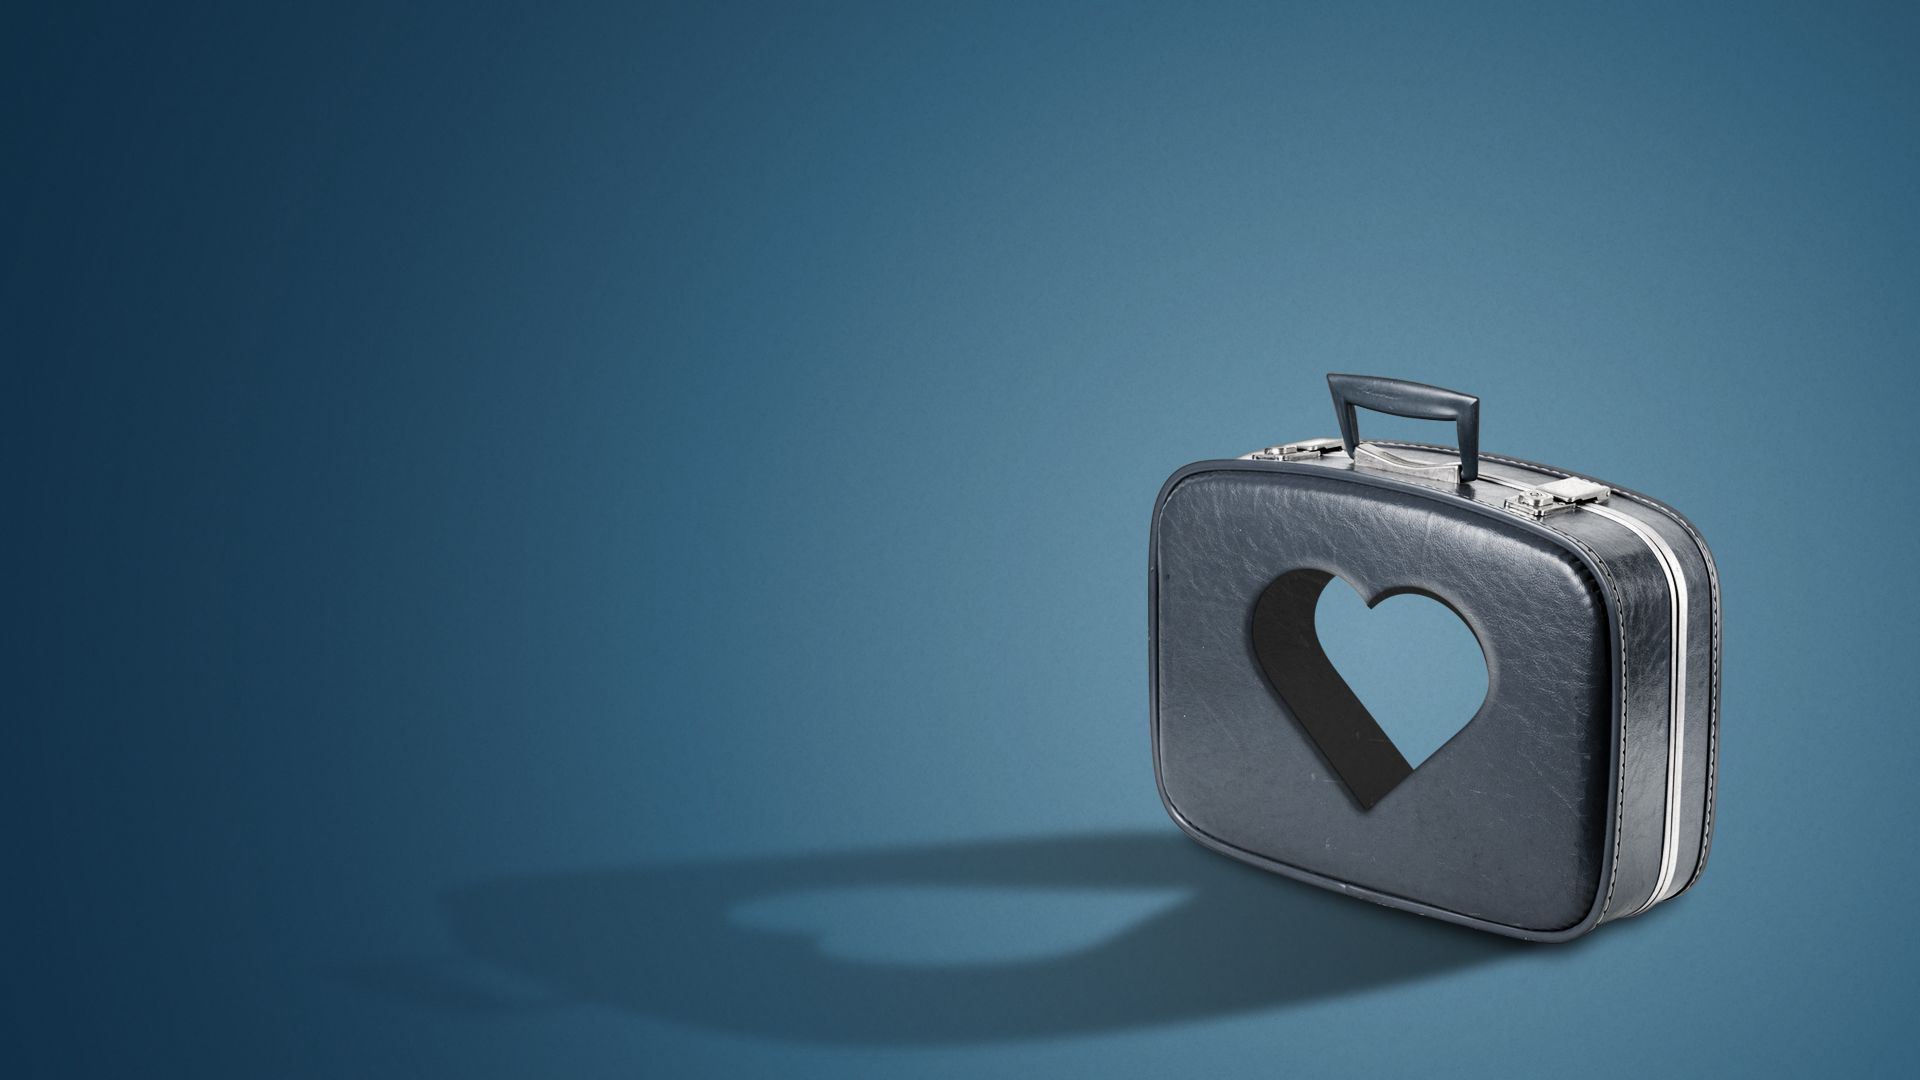 Illustration of a cutout of a heart in the middle of a suitcase.